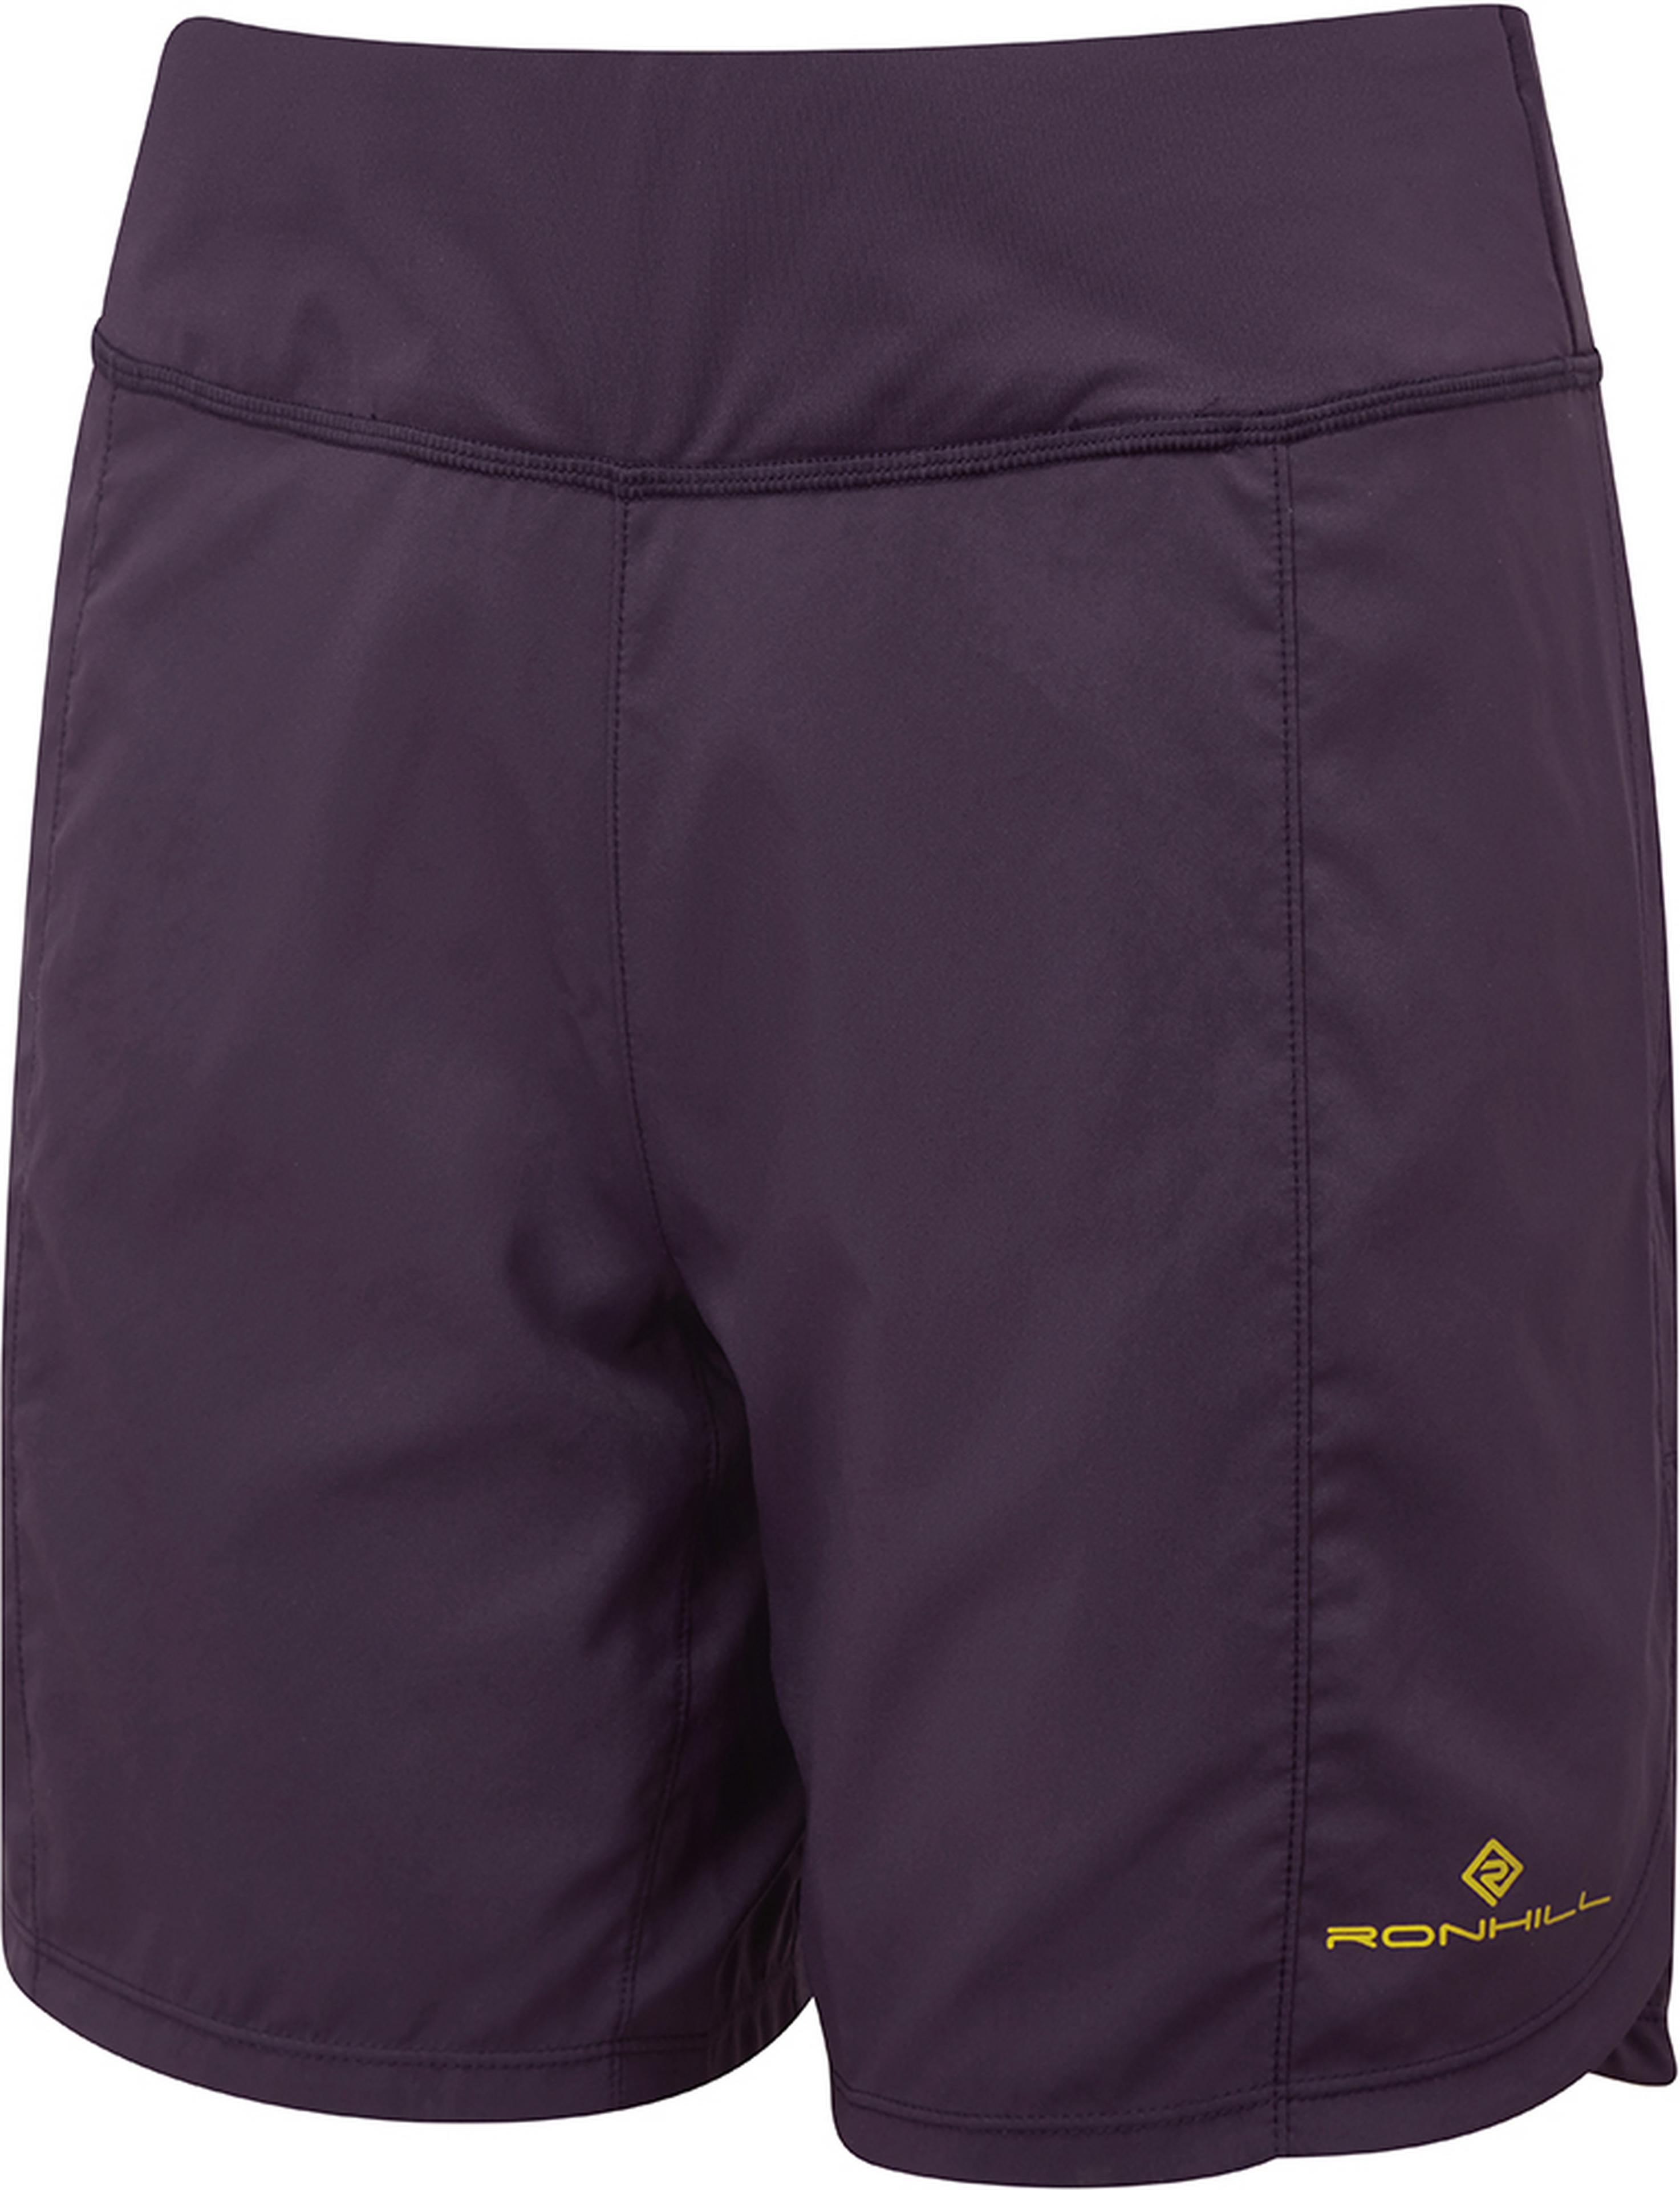 Ronhill Women’s Life 7” Unlined Shorts